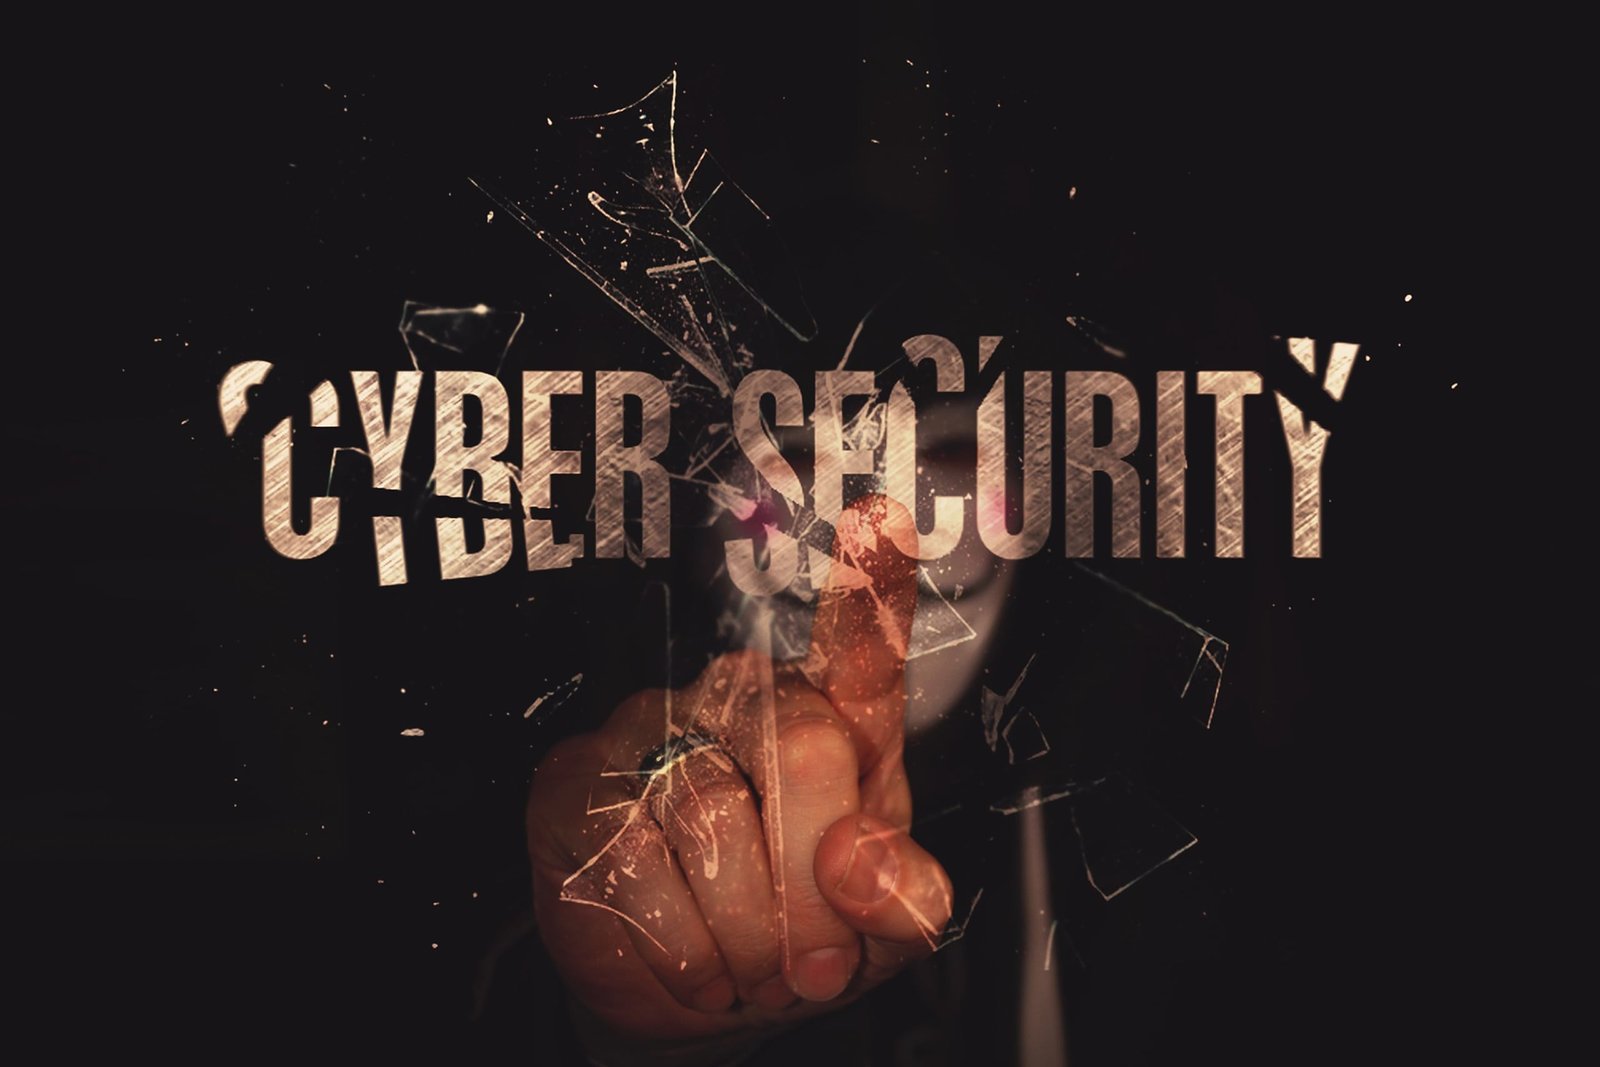 cyber security is written with a man pointing finger towards the image